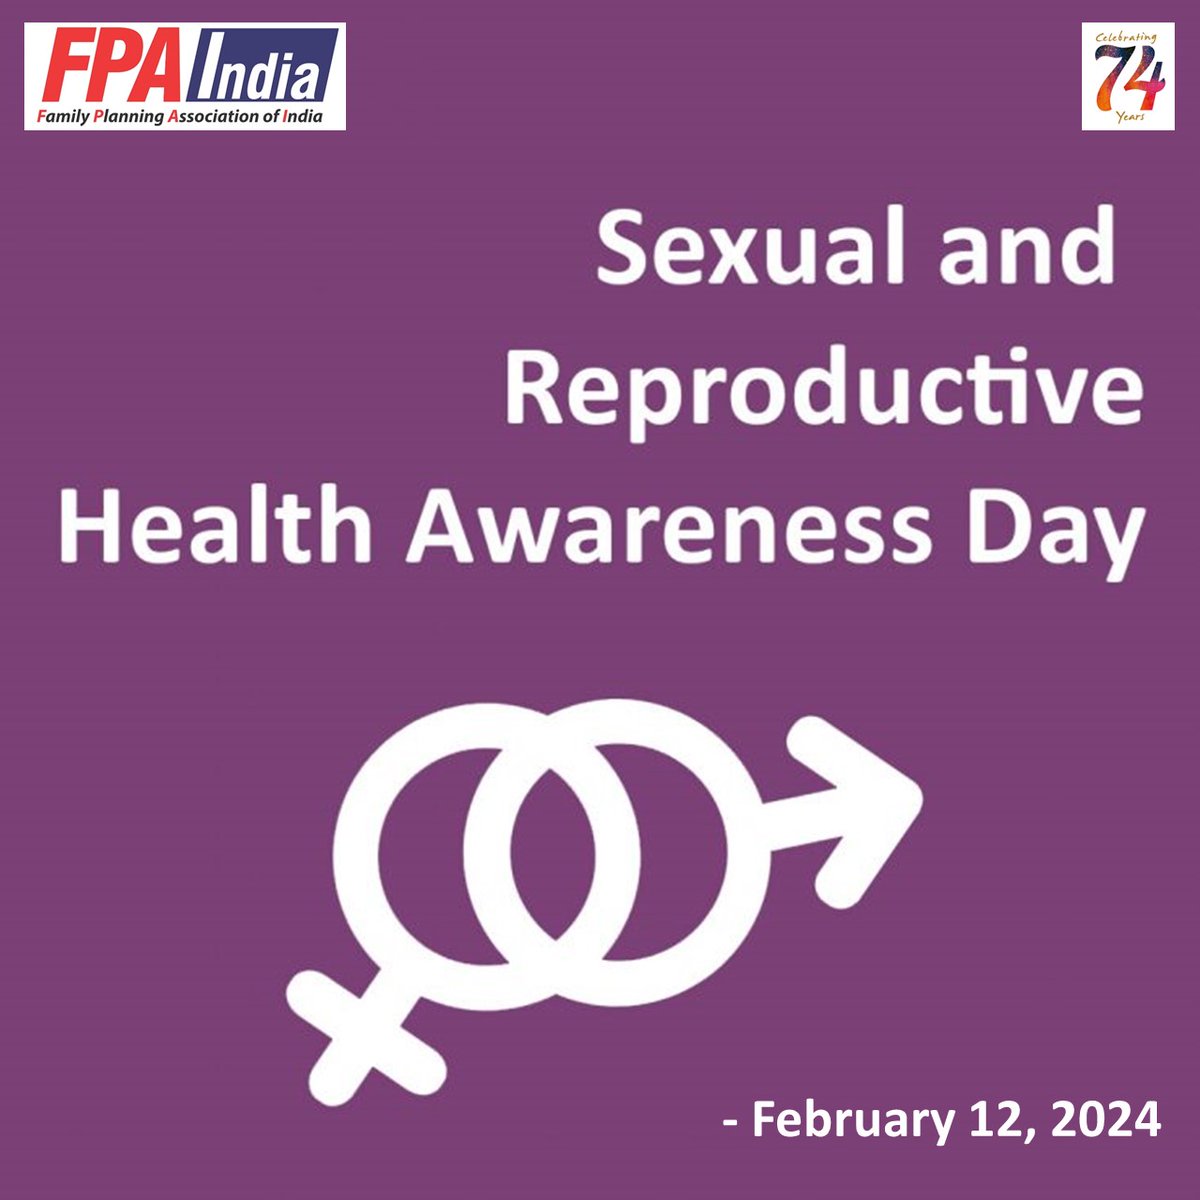 Empower yourself with knowledge! 💙 On Sexual and Reproductive Health Awareness Day, let's break the stigma, foster open conversations, and prioritize well-informed choices. Your health, your rights, your journey. #SRHawareness #FPAIndia #SRHR4All @ippf @ippfsar